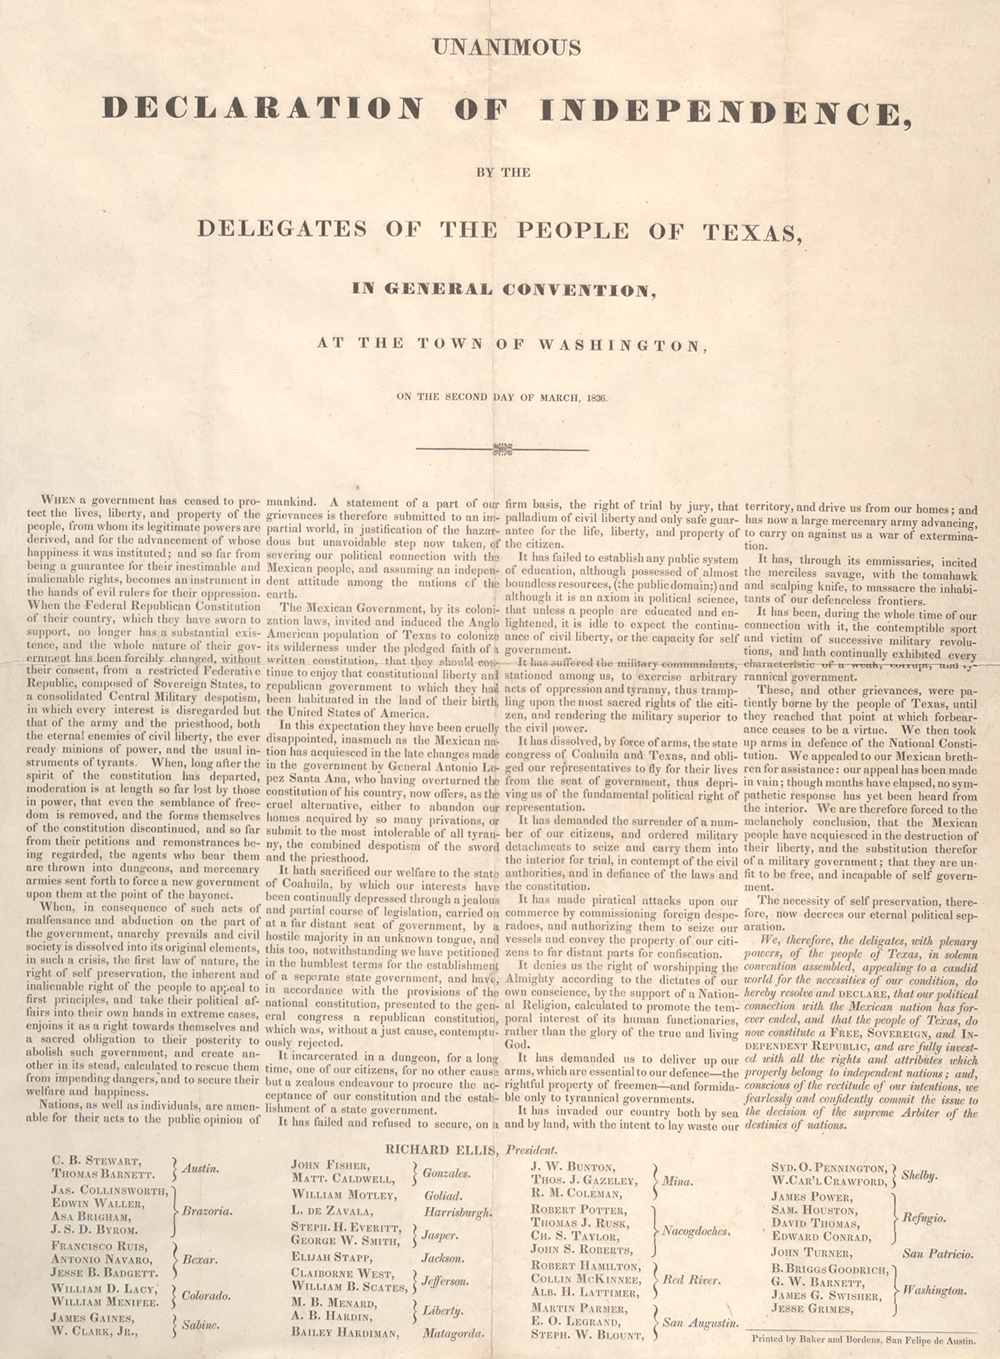 Texas Declaration of Independence, 1836